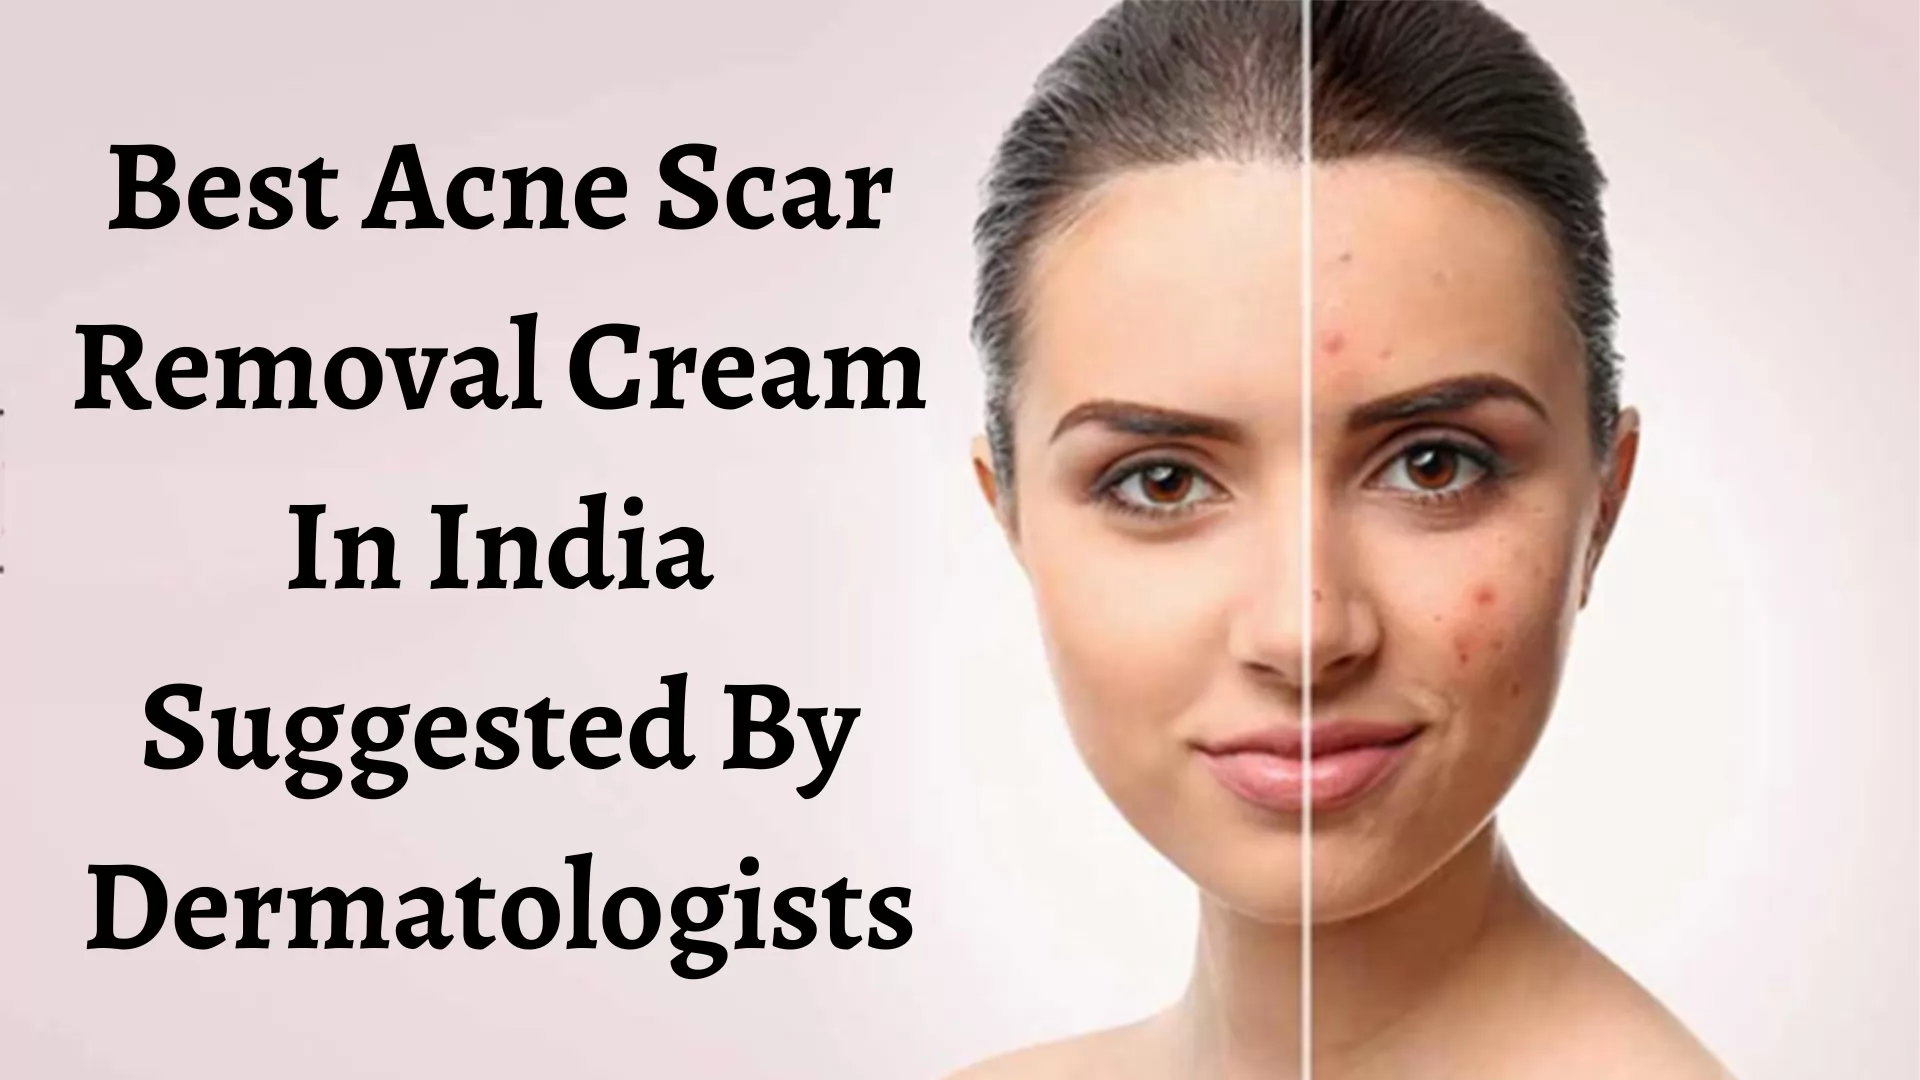 16 Best Acne Scar Removal Cream In India Suggested By Dermatologists